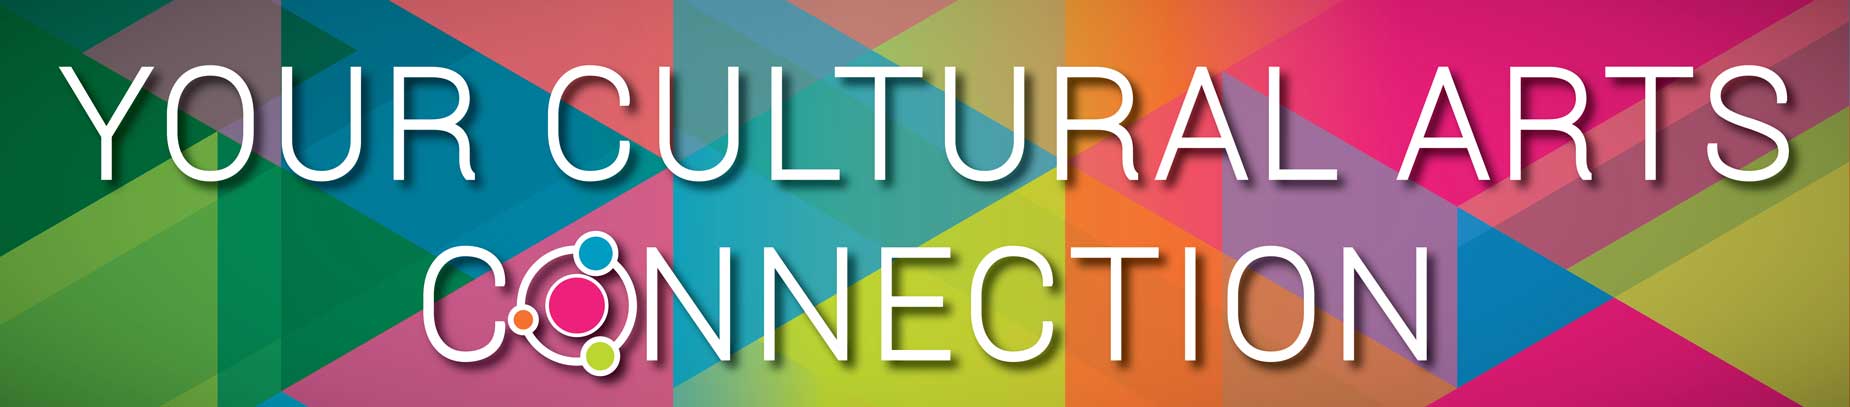 Your Cultural Arts Connection